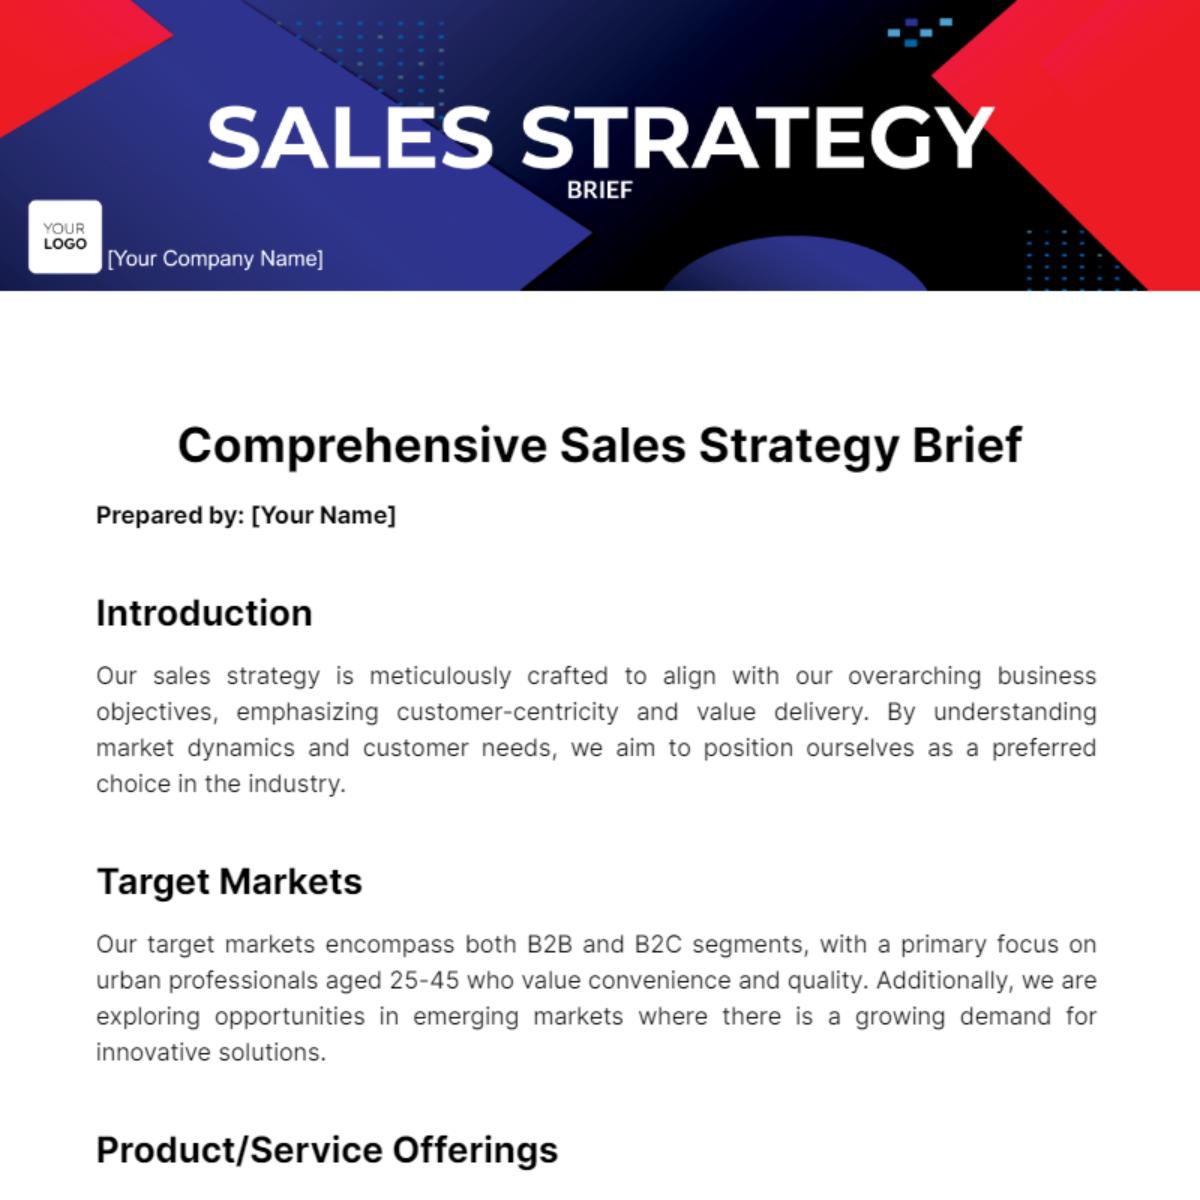 Sales Strategy Brief Template